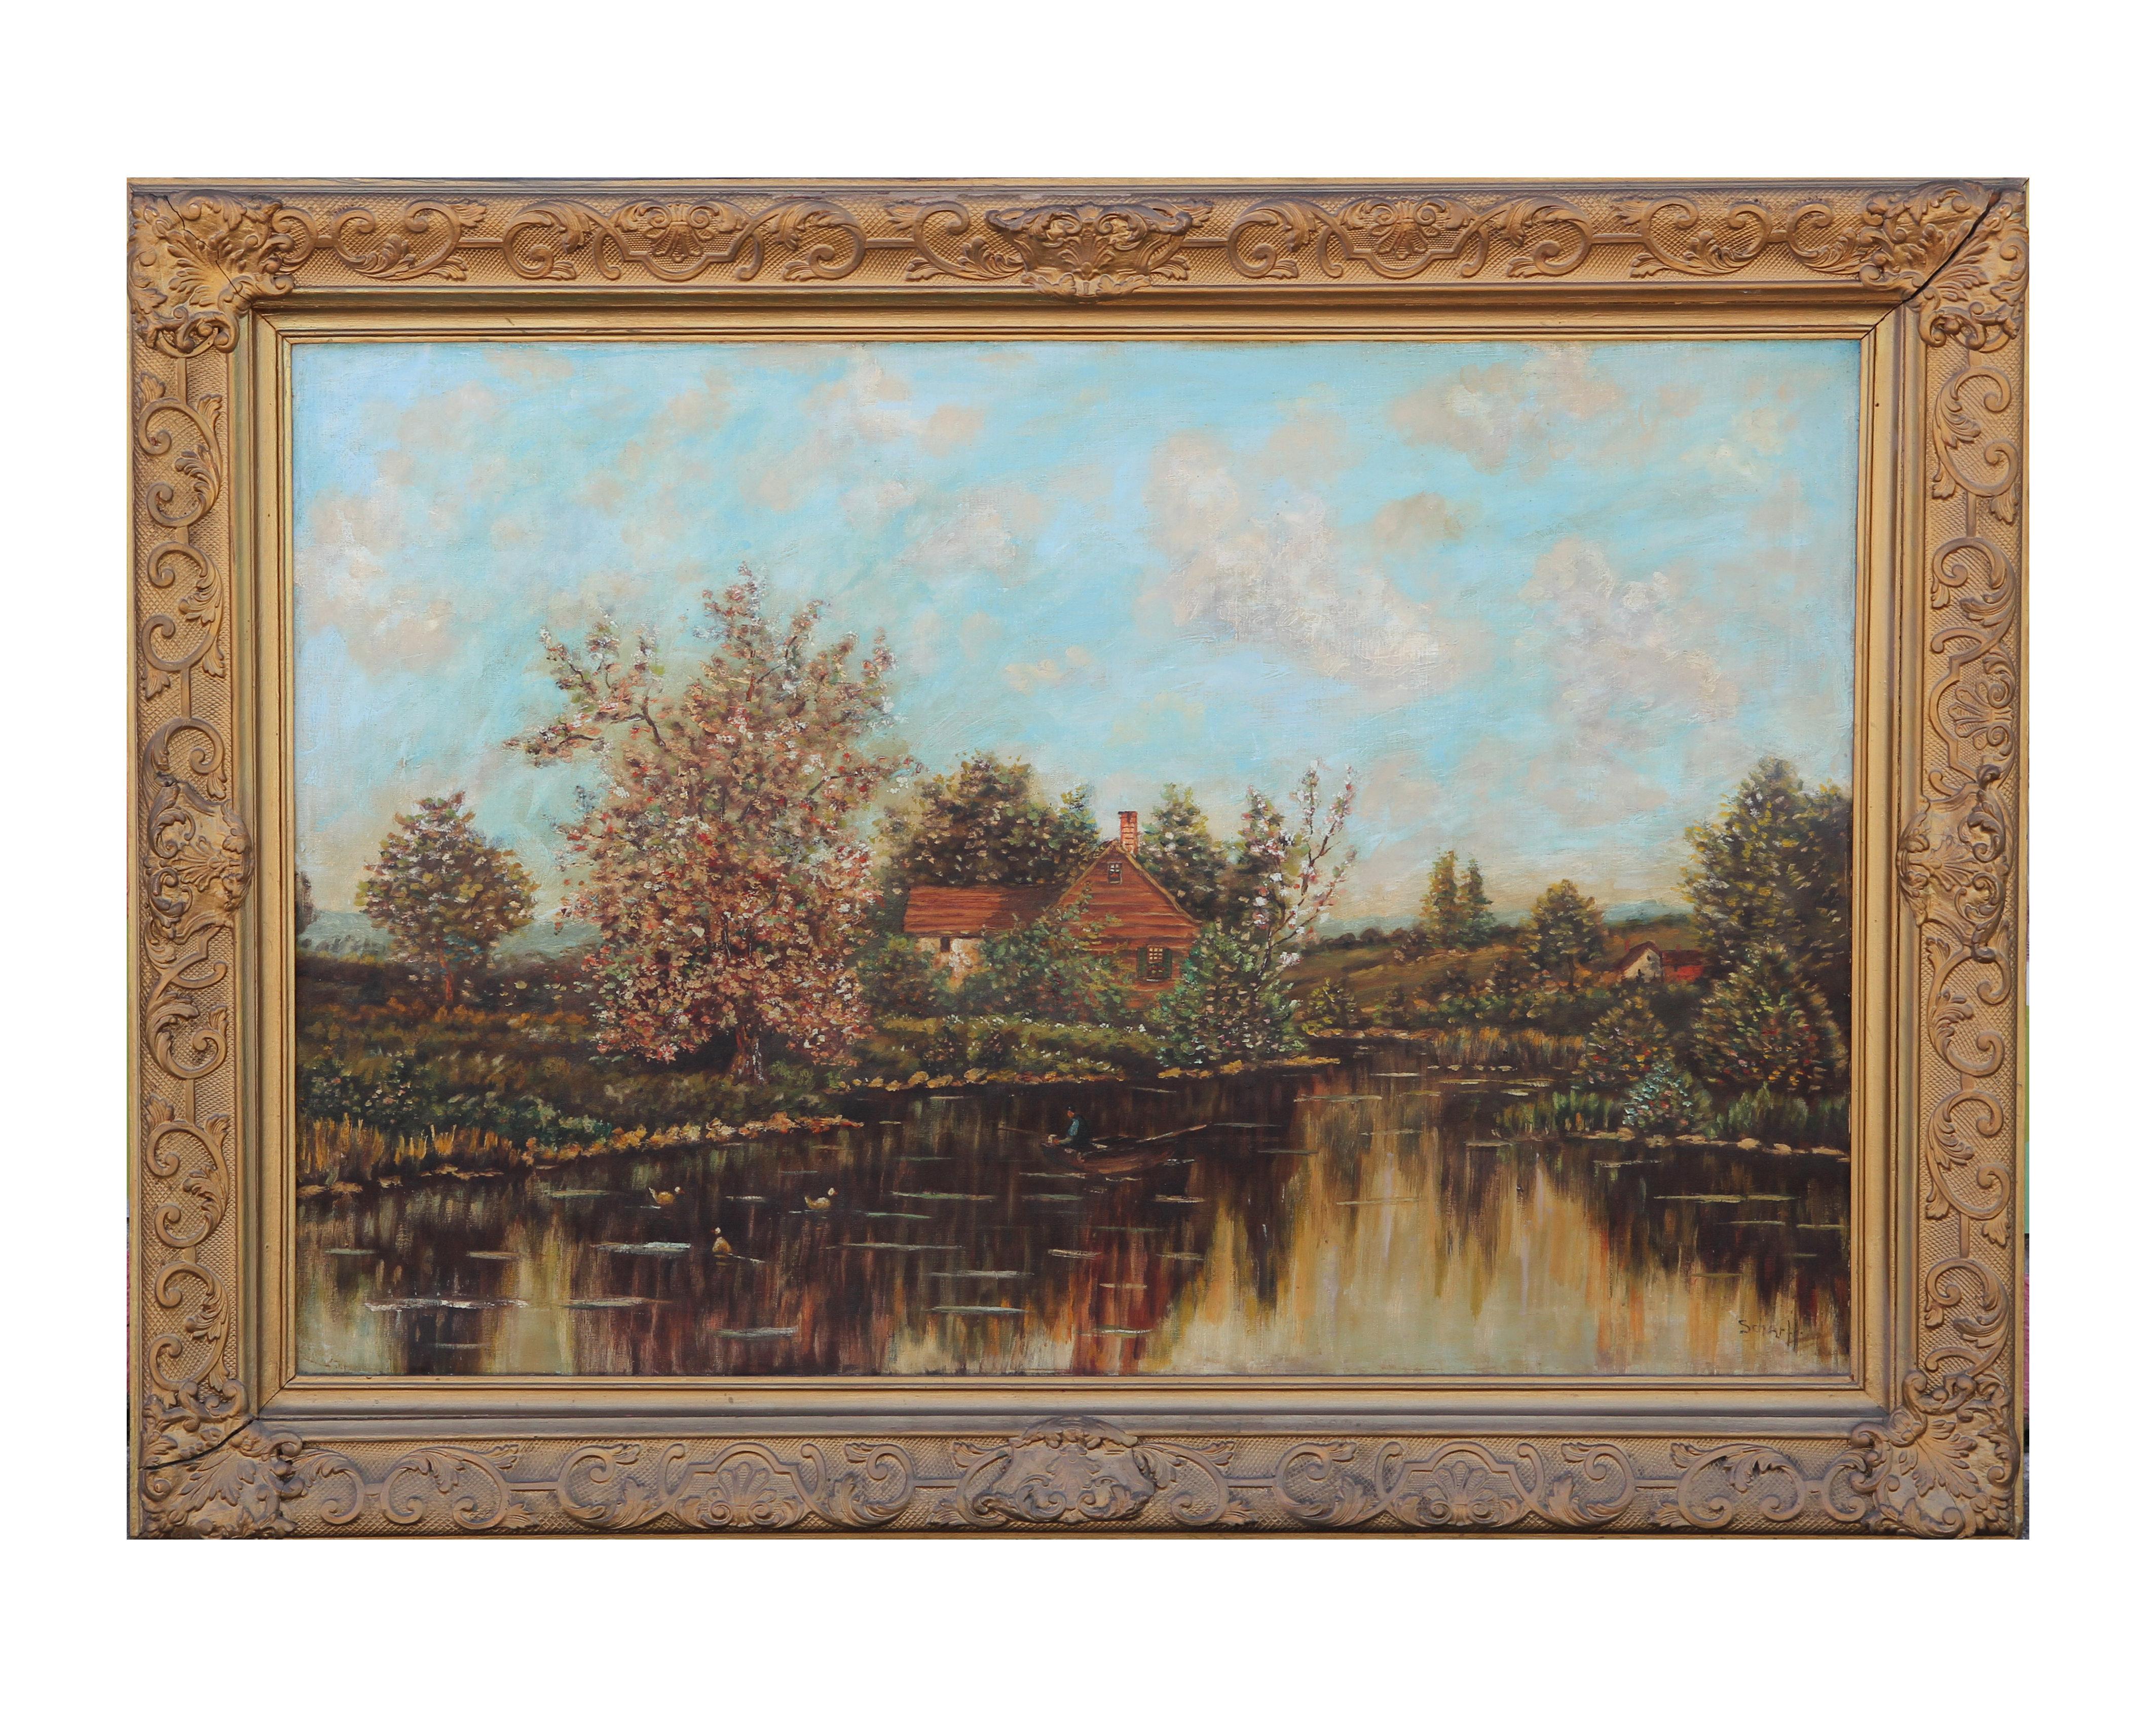 Idyllic pastoral landscape in a loose Impressionistic style of a house by a lake. Signed in the lower right corner. Hung in a beautiful gold frame. 
Dimensions without Frame: H 24.25 in x W 36.25 in x D 1 in. 

Artist Biography:
Erna S. Scharff was